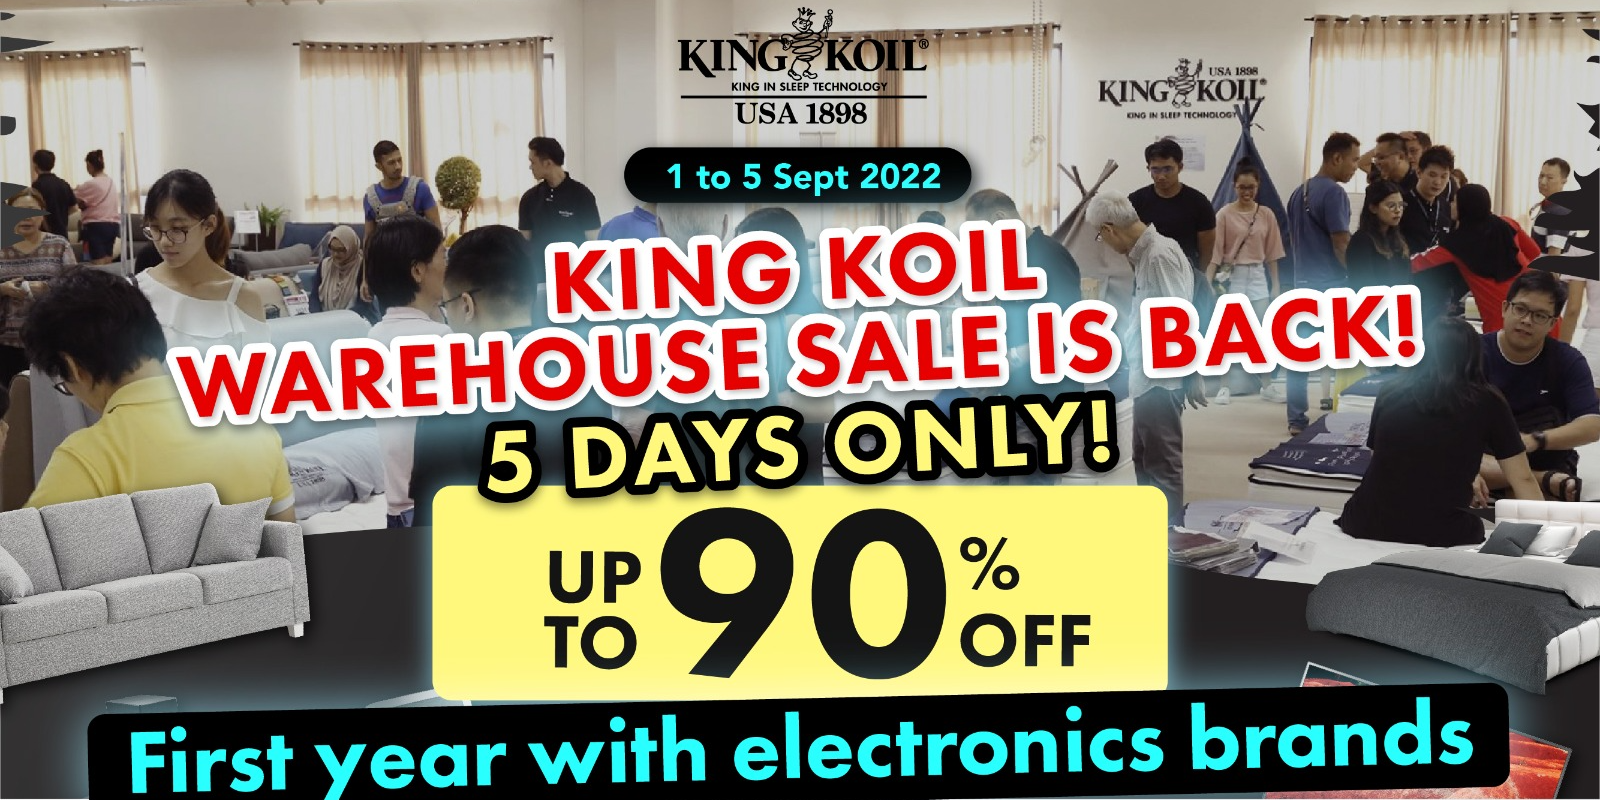 Super Hot Consumer Electronics Deals Available at King Koil Warehouse Sale, Up to 90% OFF till 5 Sep